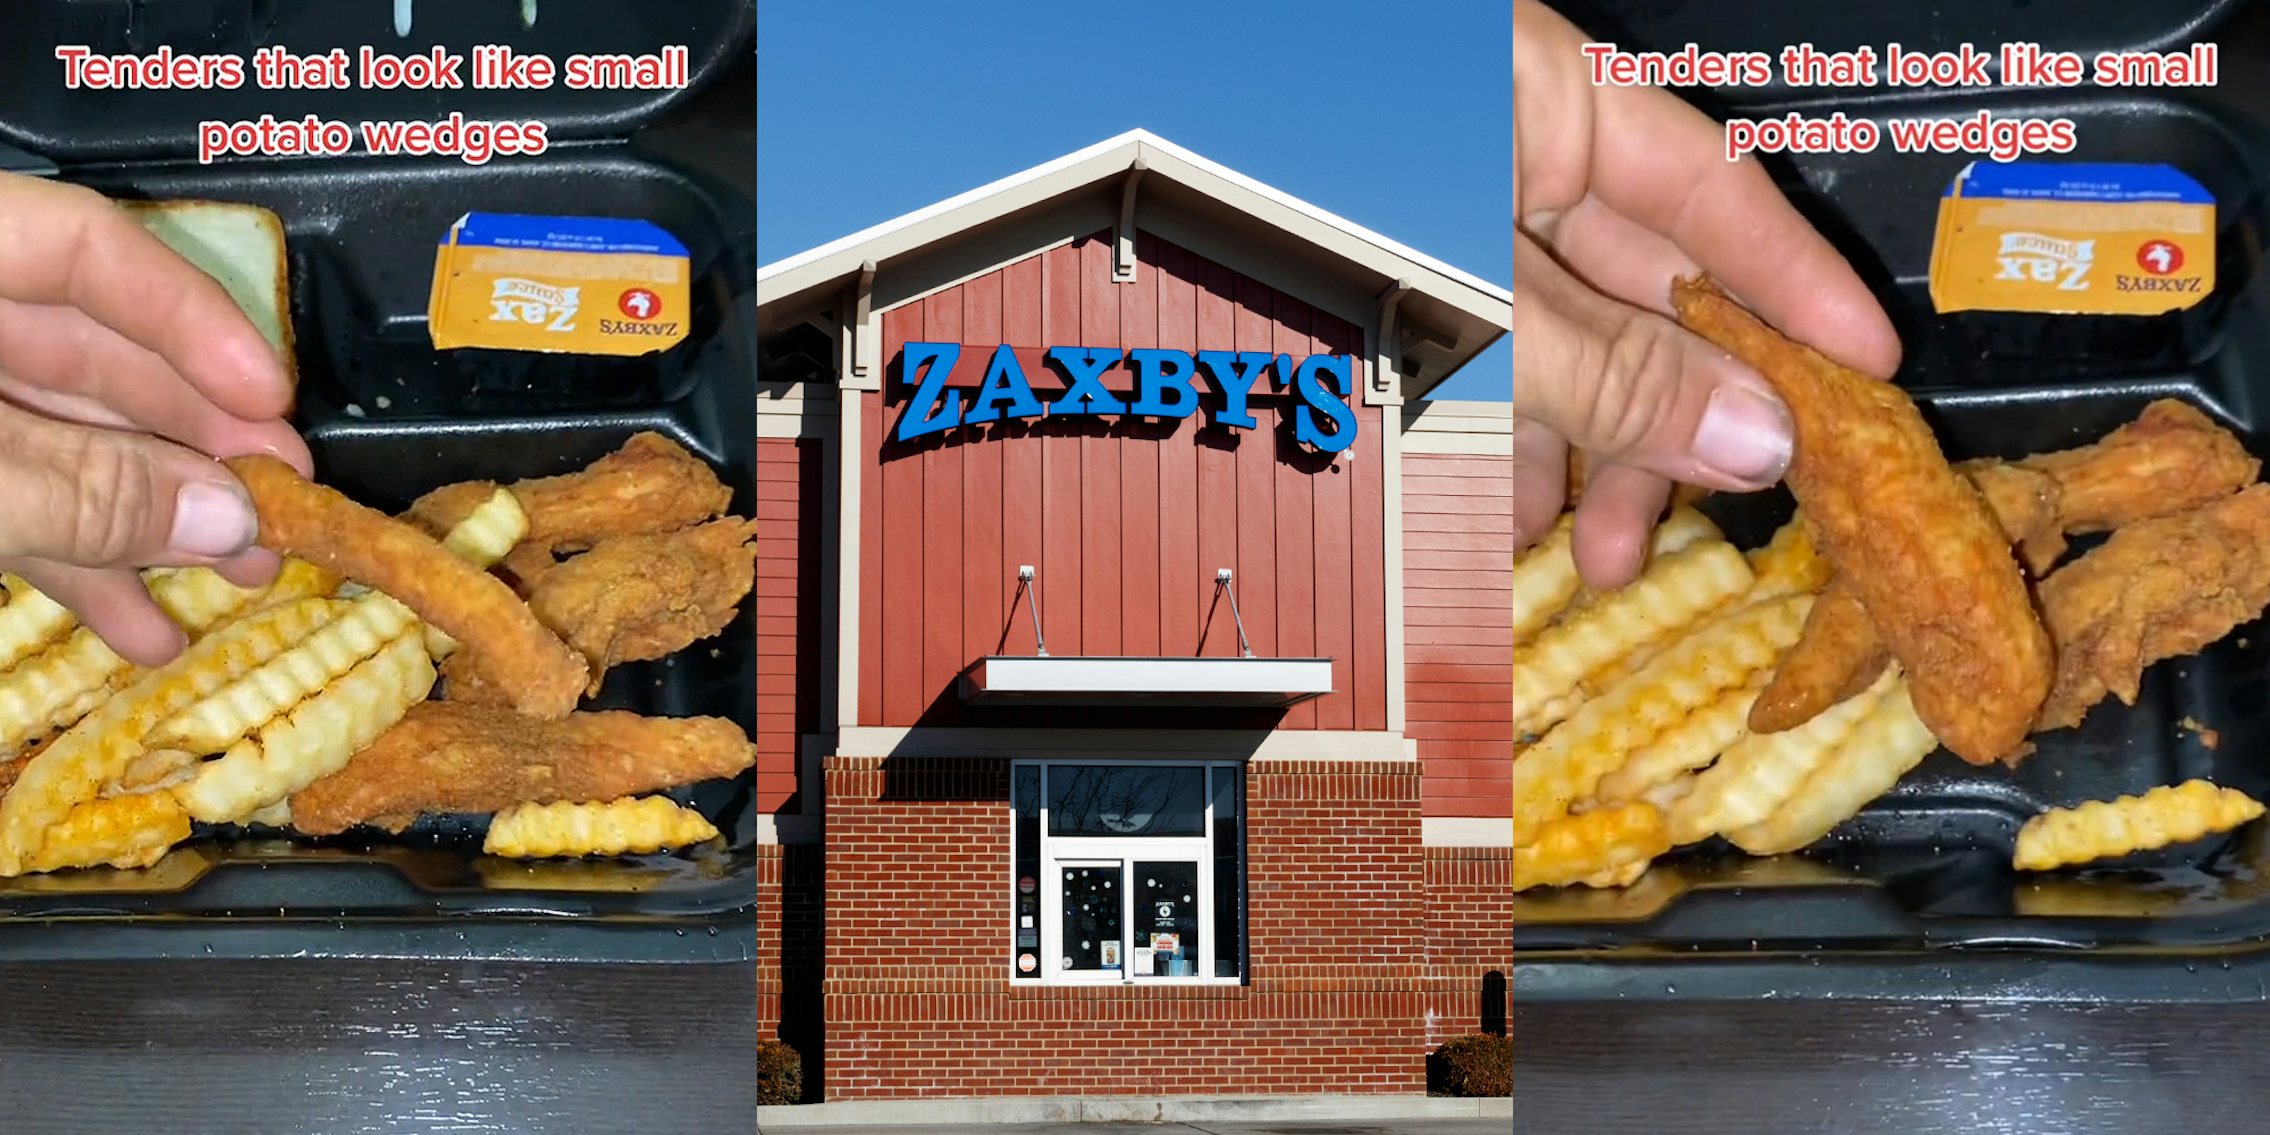 man hand holding chicken tender caption 'Tenders look like small potato wedges' (l) Zaxby's building with sign (c) man hand holding chicken tender caption 'Tenders look like small potato wedges' (r)